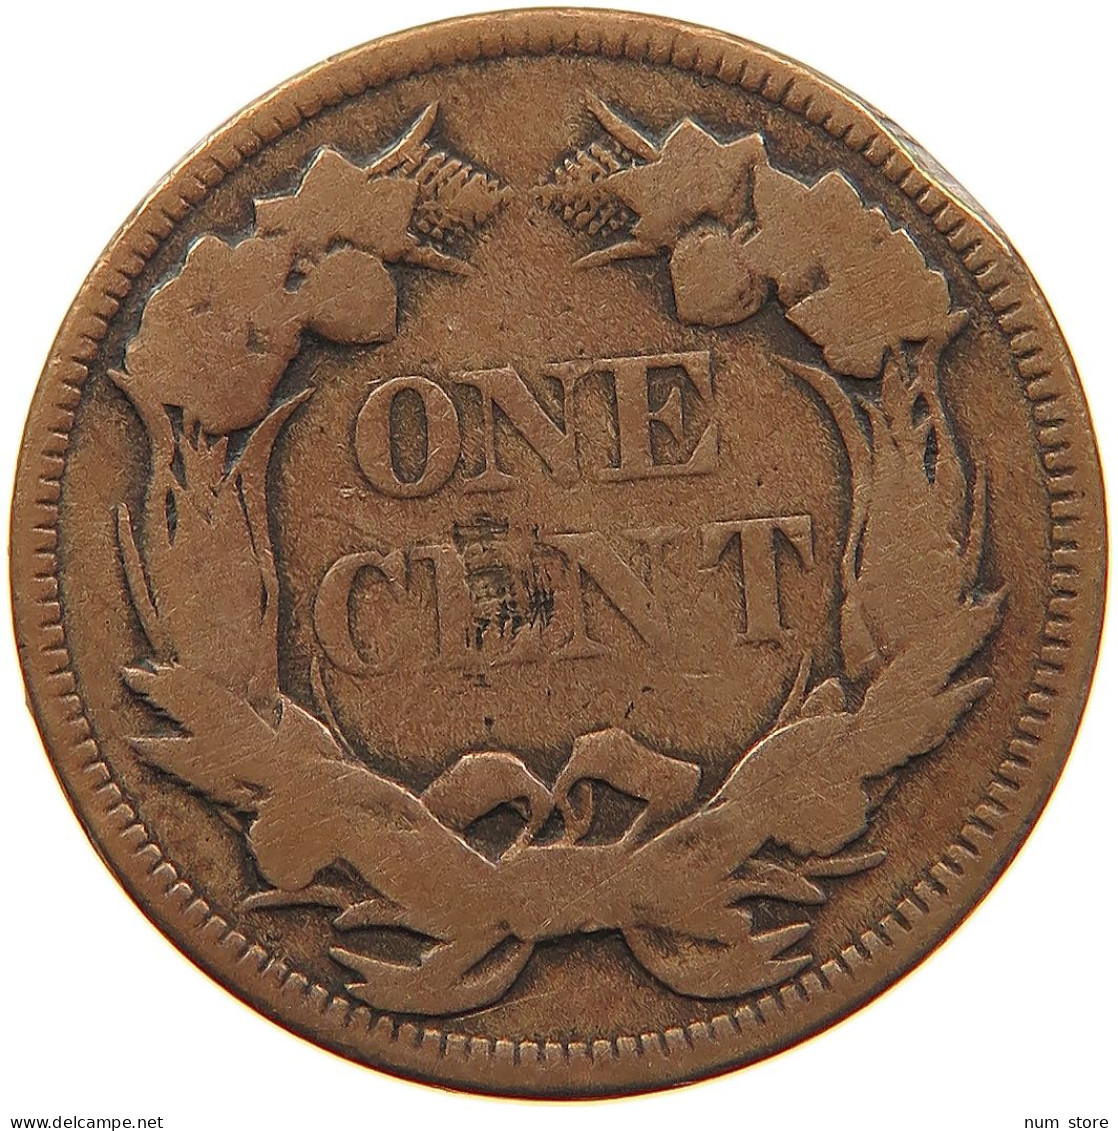 UNITED STATES OF AMERICA CENT 1857 FLYING EAGLE #t143 0423 - 1856-1858: Flying Eagle